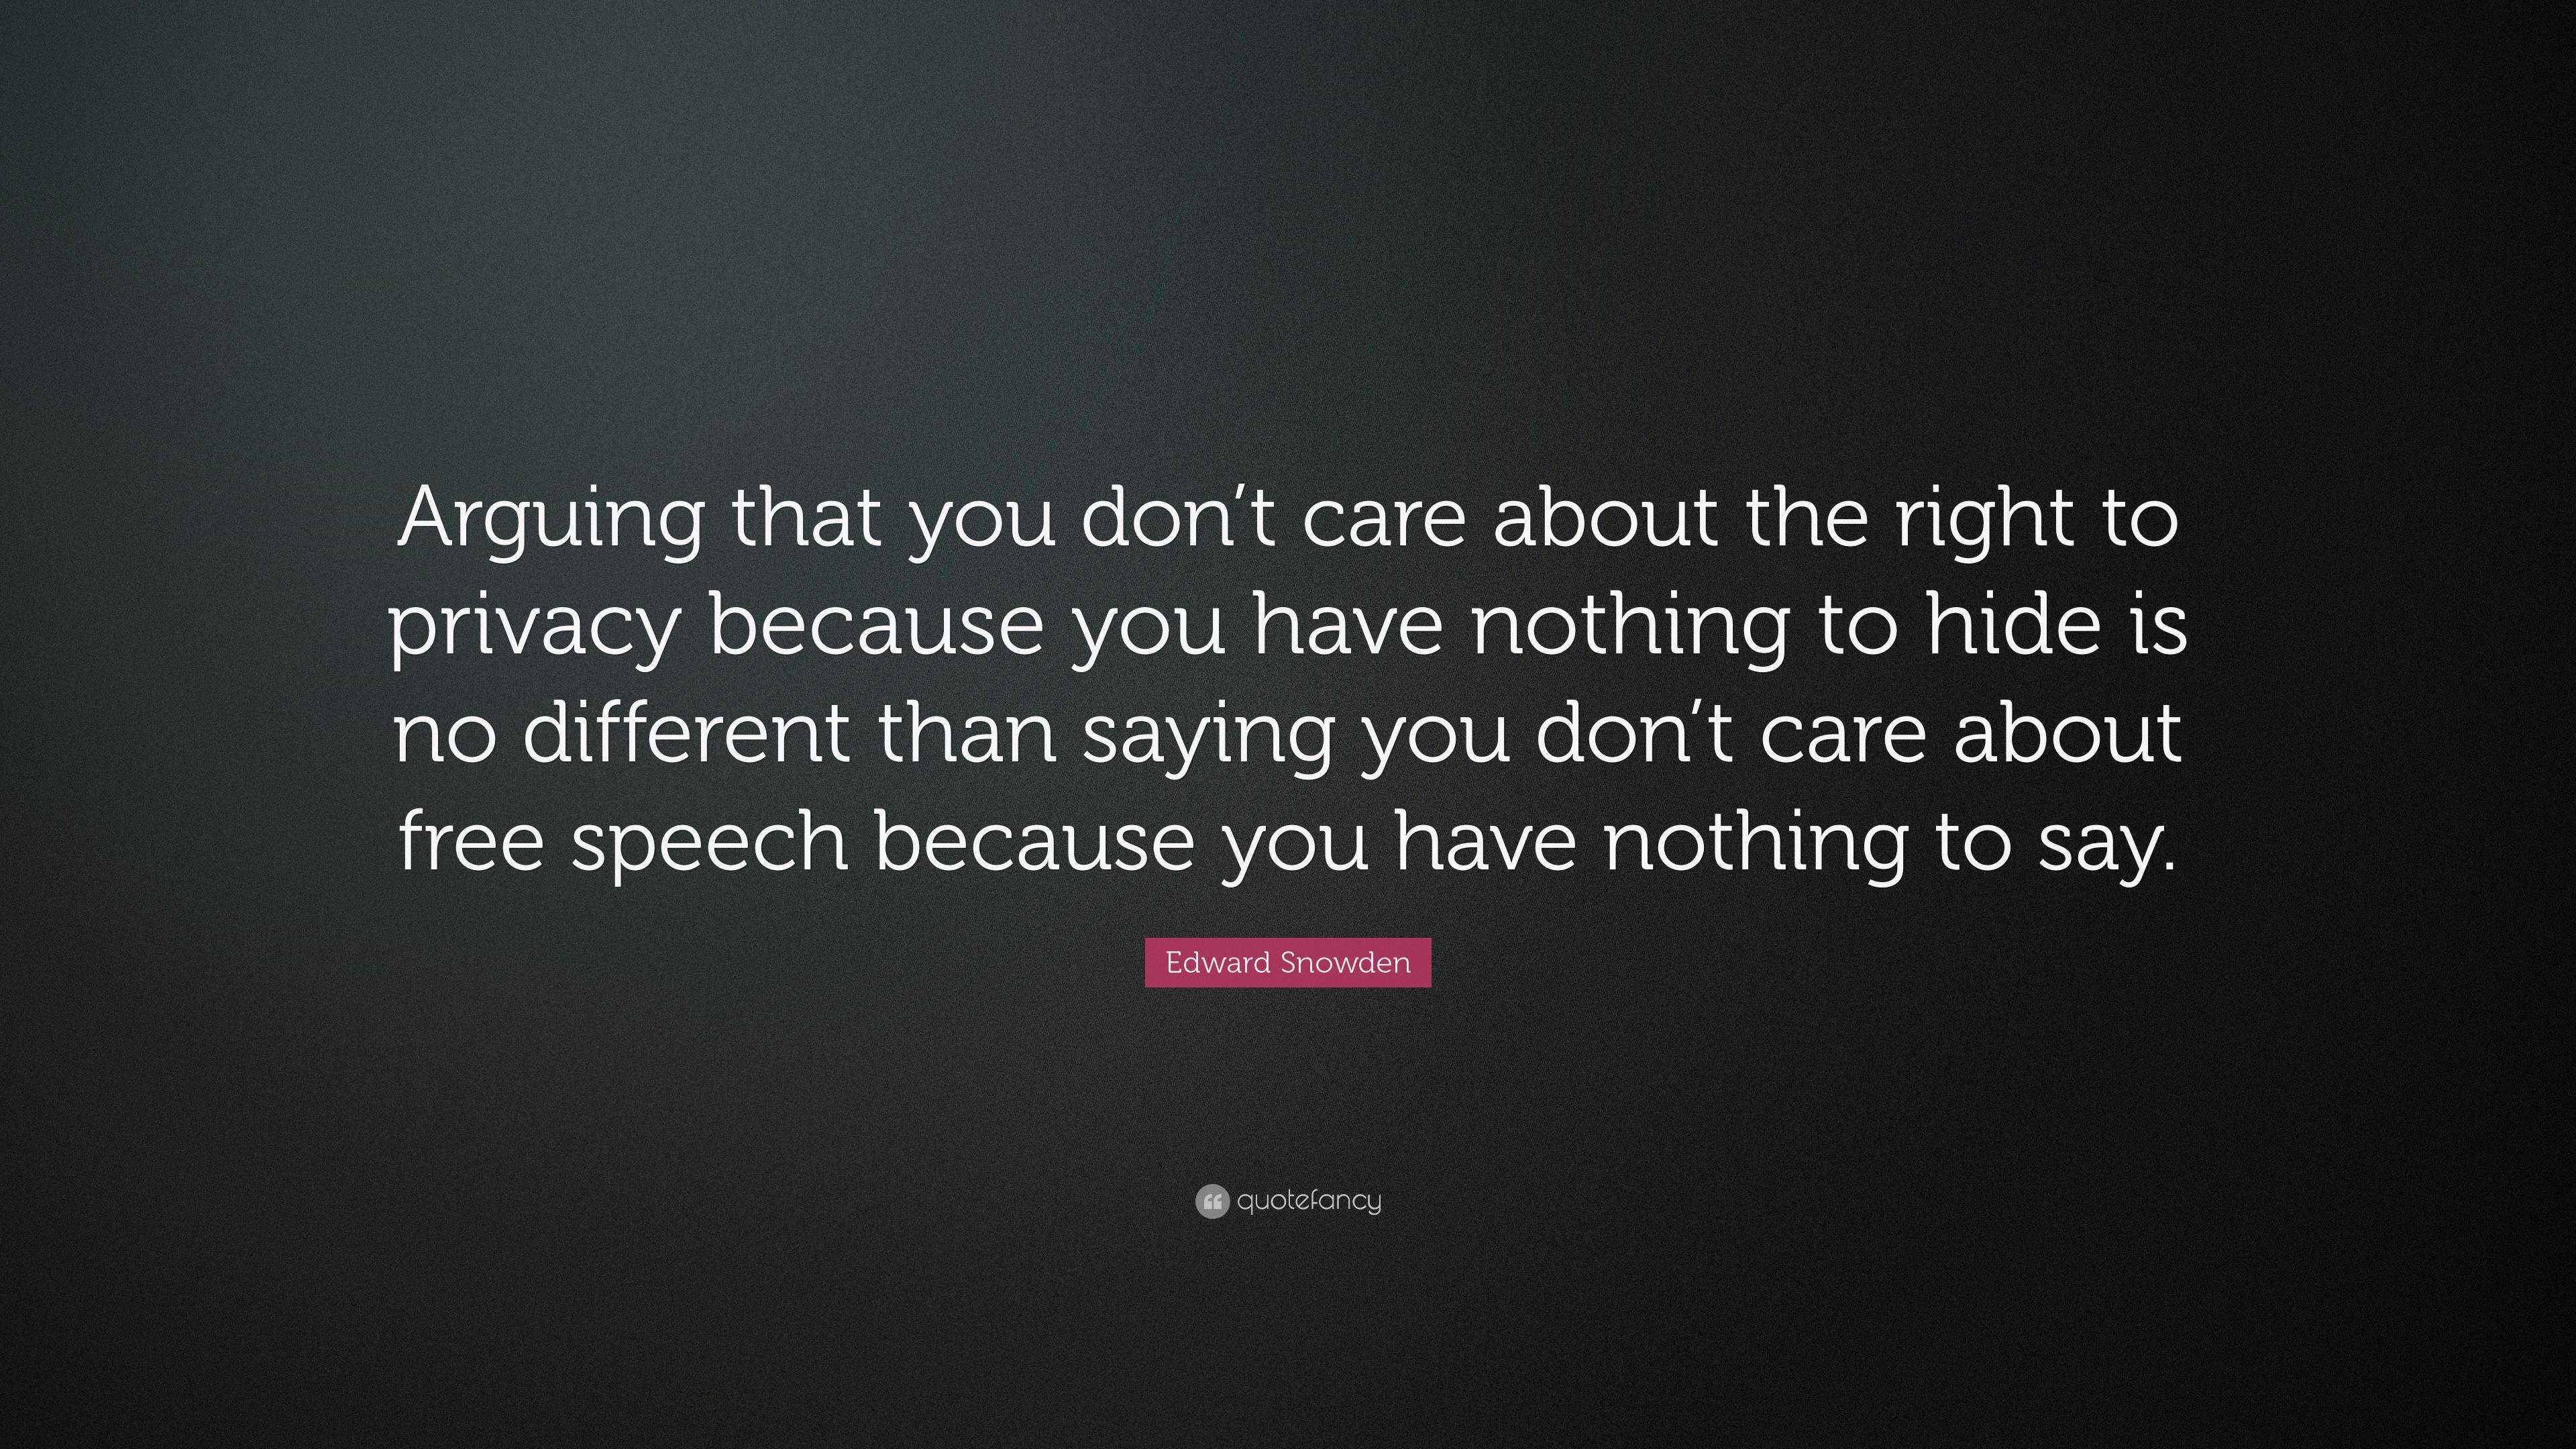 Edward Snowden Quote: "Arguing that you don't care about the righ...